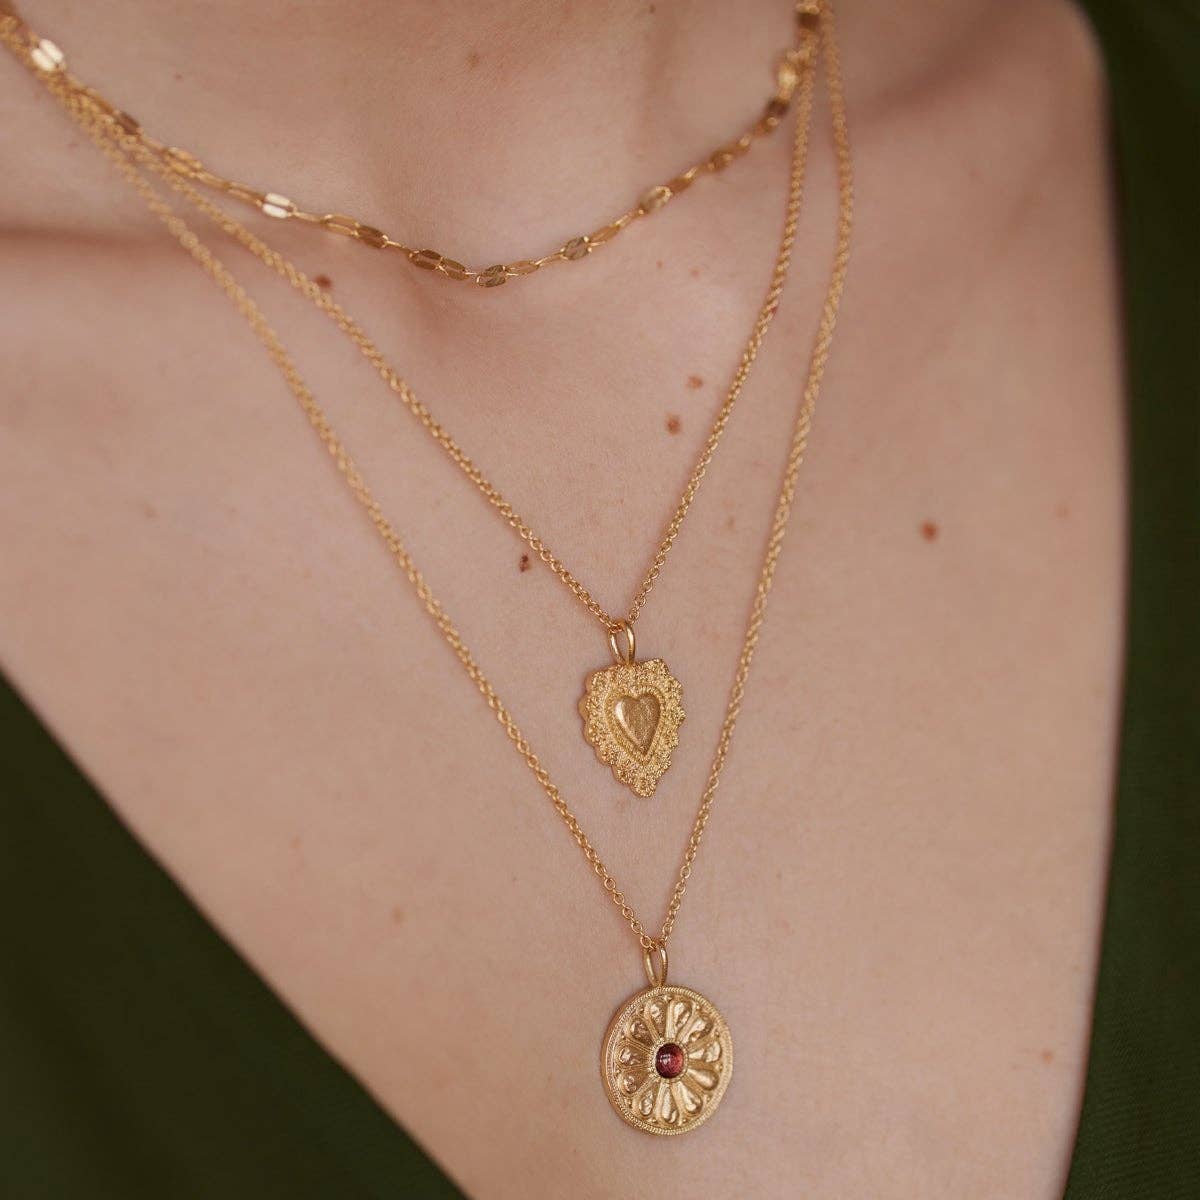 Aphrodite Necklace | Waterproof 24k Sustainable - Styled by Ashley Brooke